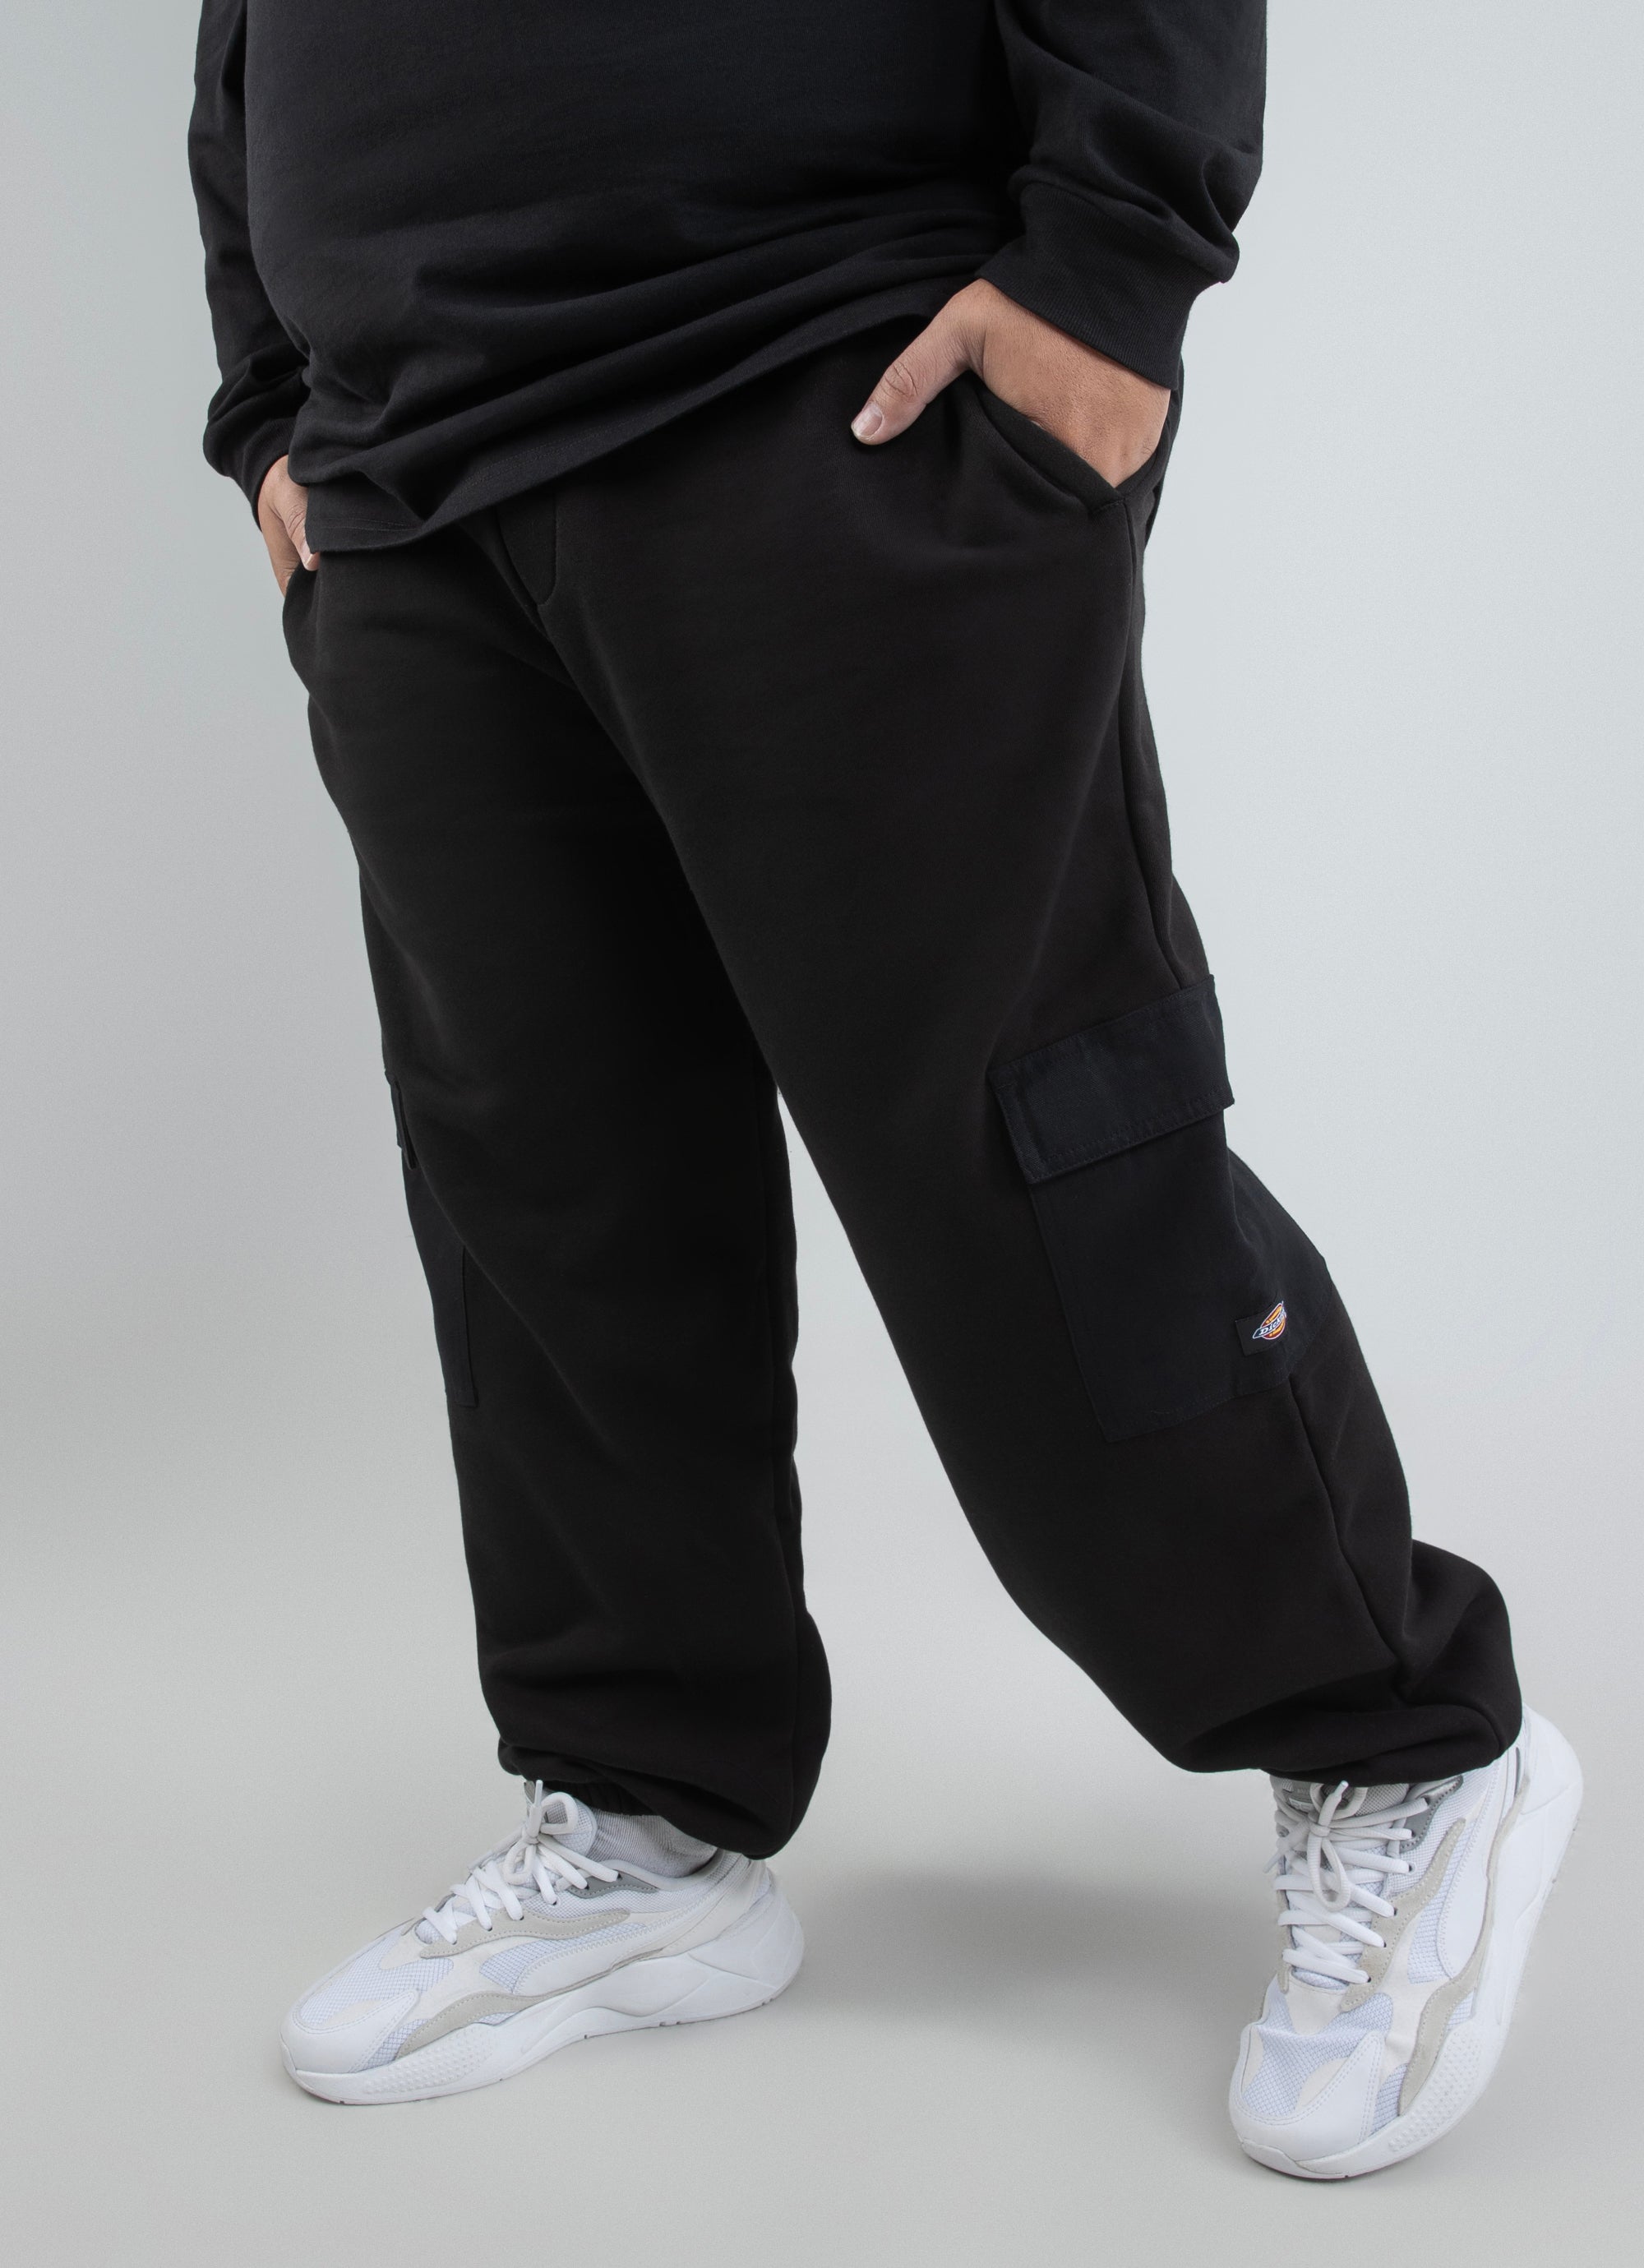 SPORTIFY Mens Cotton Knit Melange Grey Color Casual Cargo Track Pants With  Bottom Rib & Side Patch Pockets in Udaipur-Rajasthan at best price by Mera  Sai Traders - Justdial